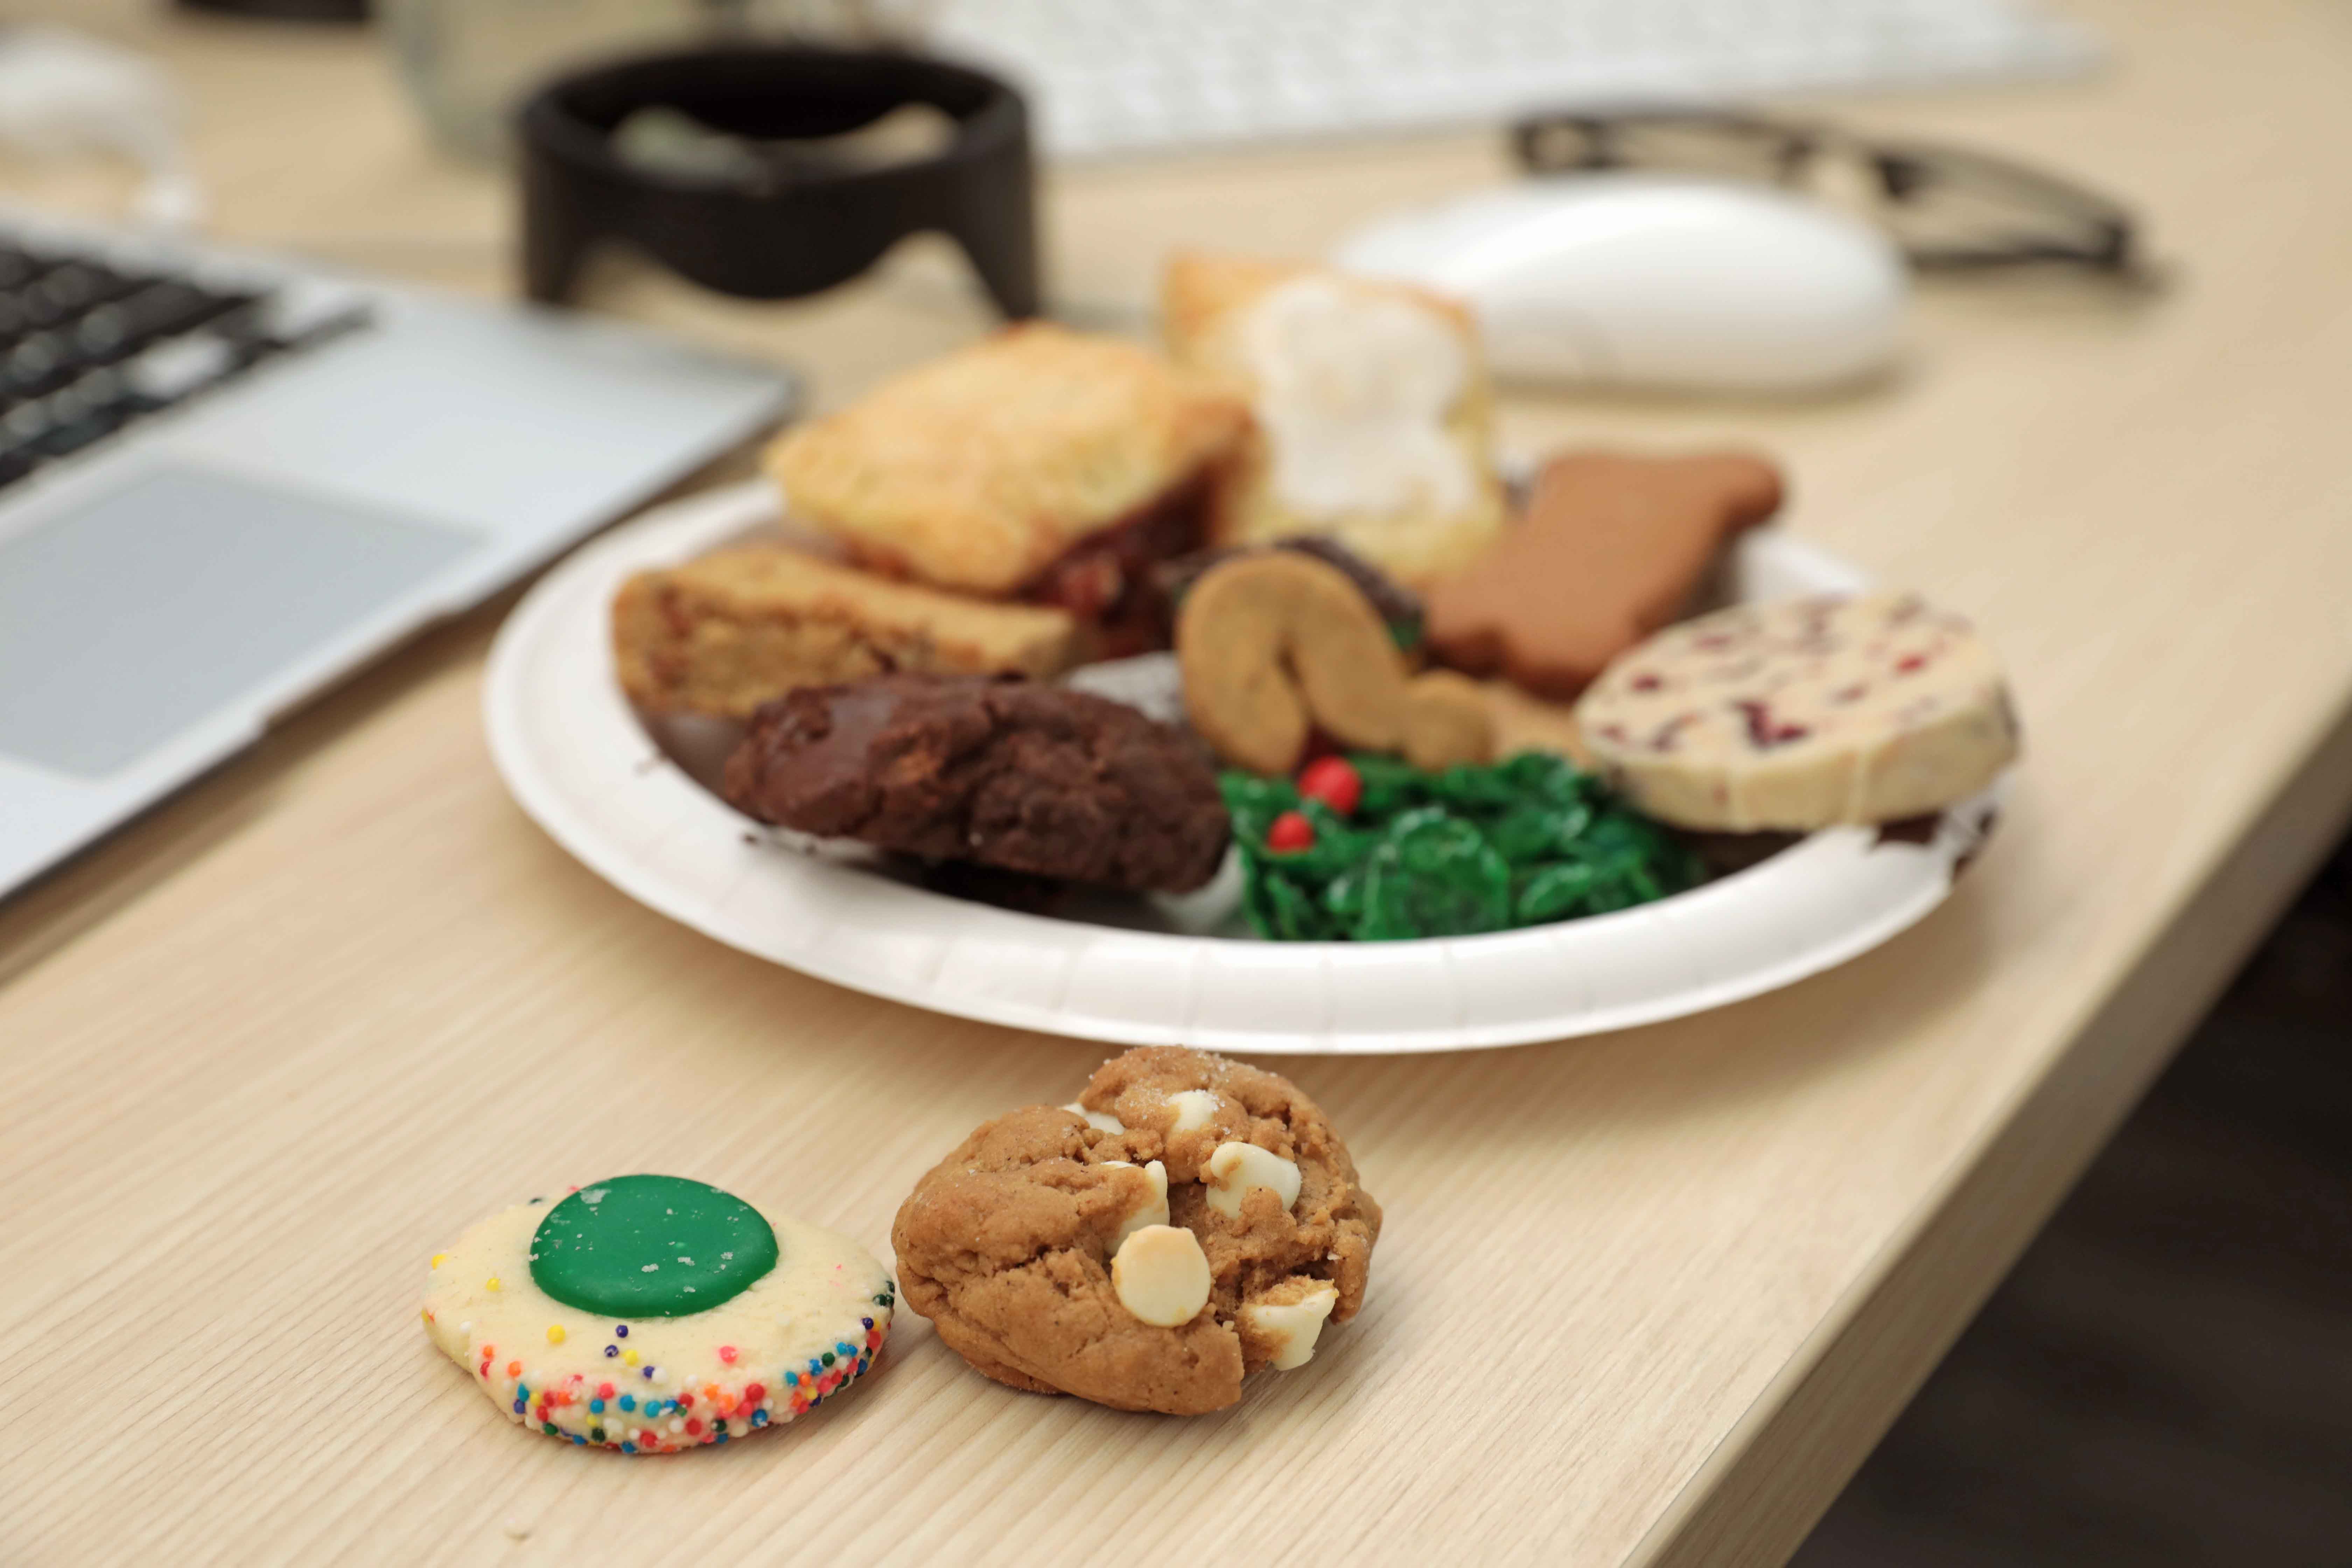 A plate of holiday cookies on a desk